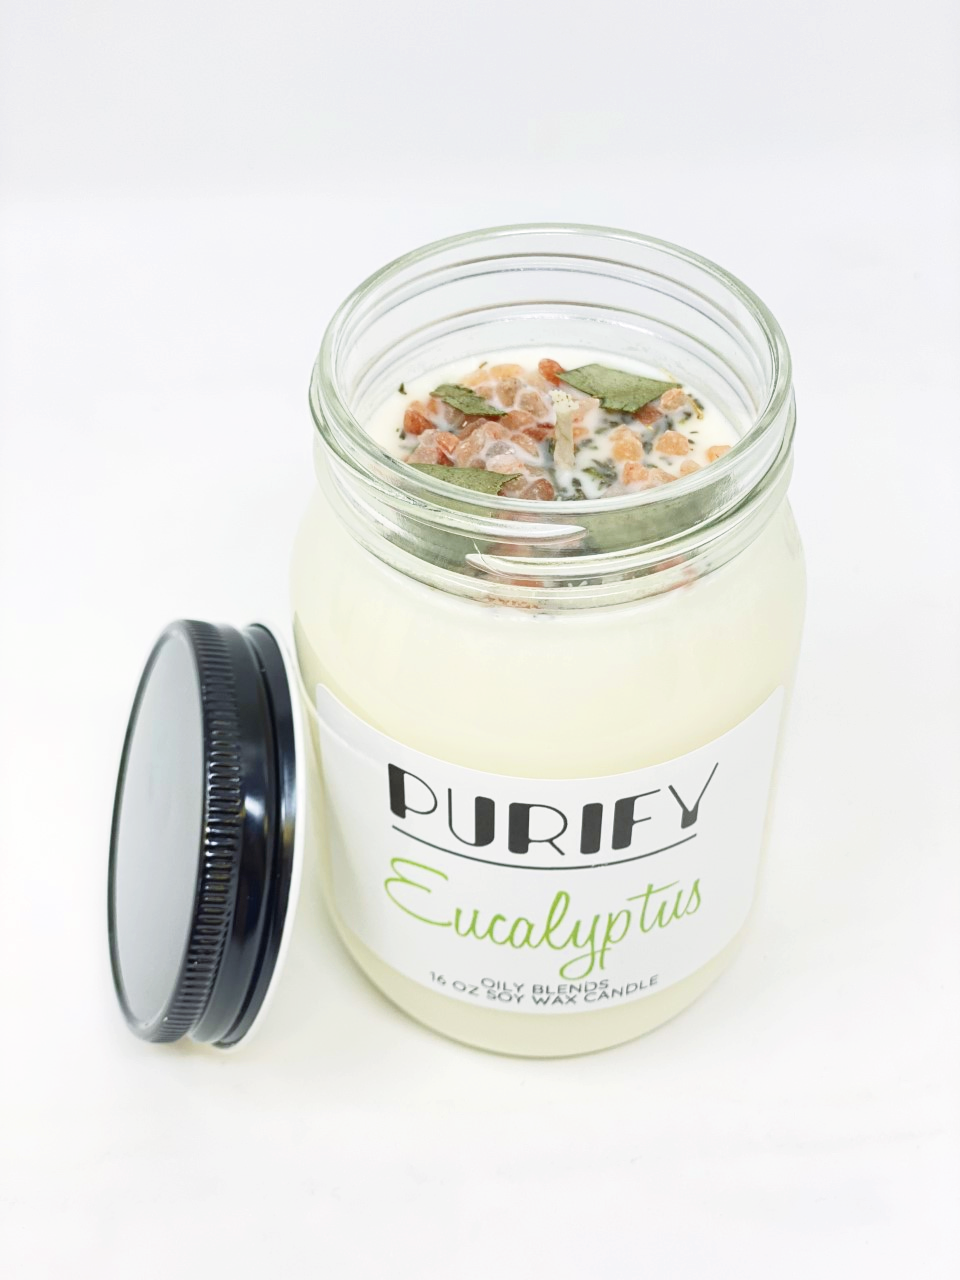 Jumbo Purify Candles with Herbs and Pink Salt - 100 Hour Burn Time Soy Wax Candles